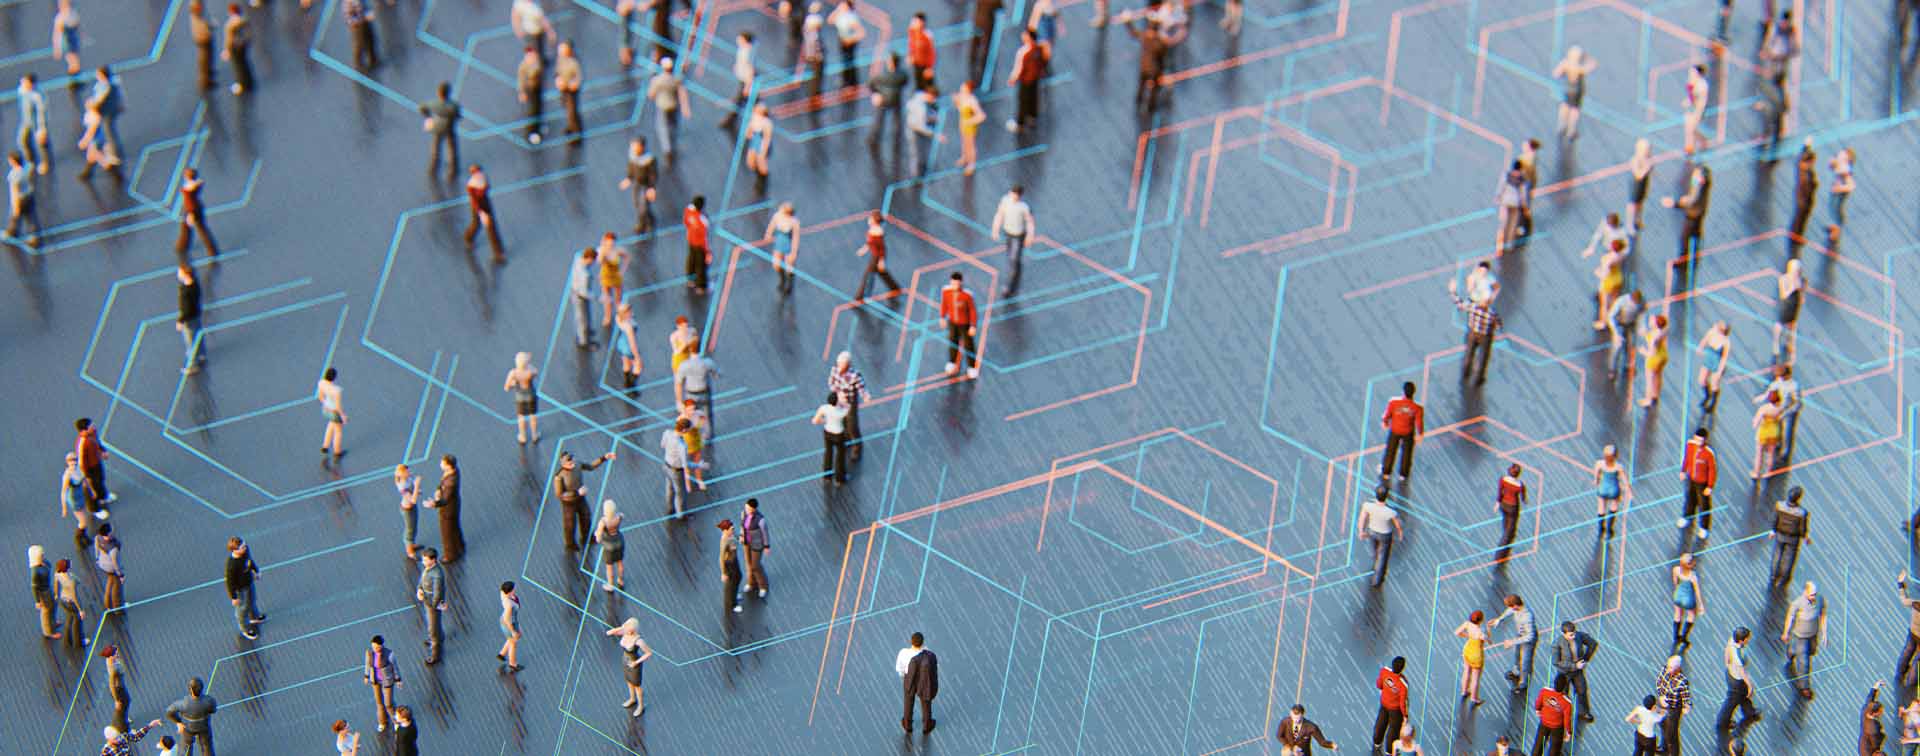 To- down view of small human figurines staged on a digital floor